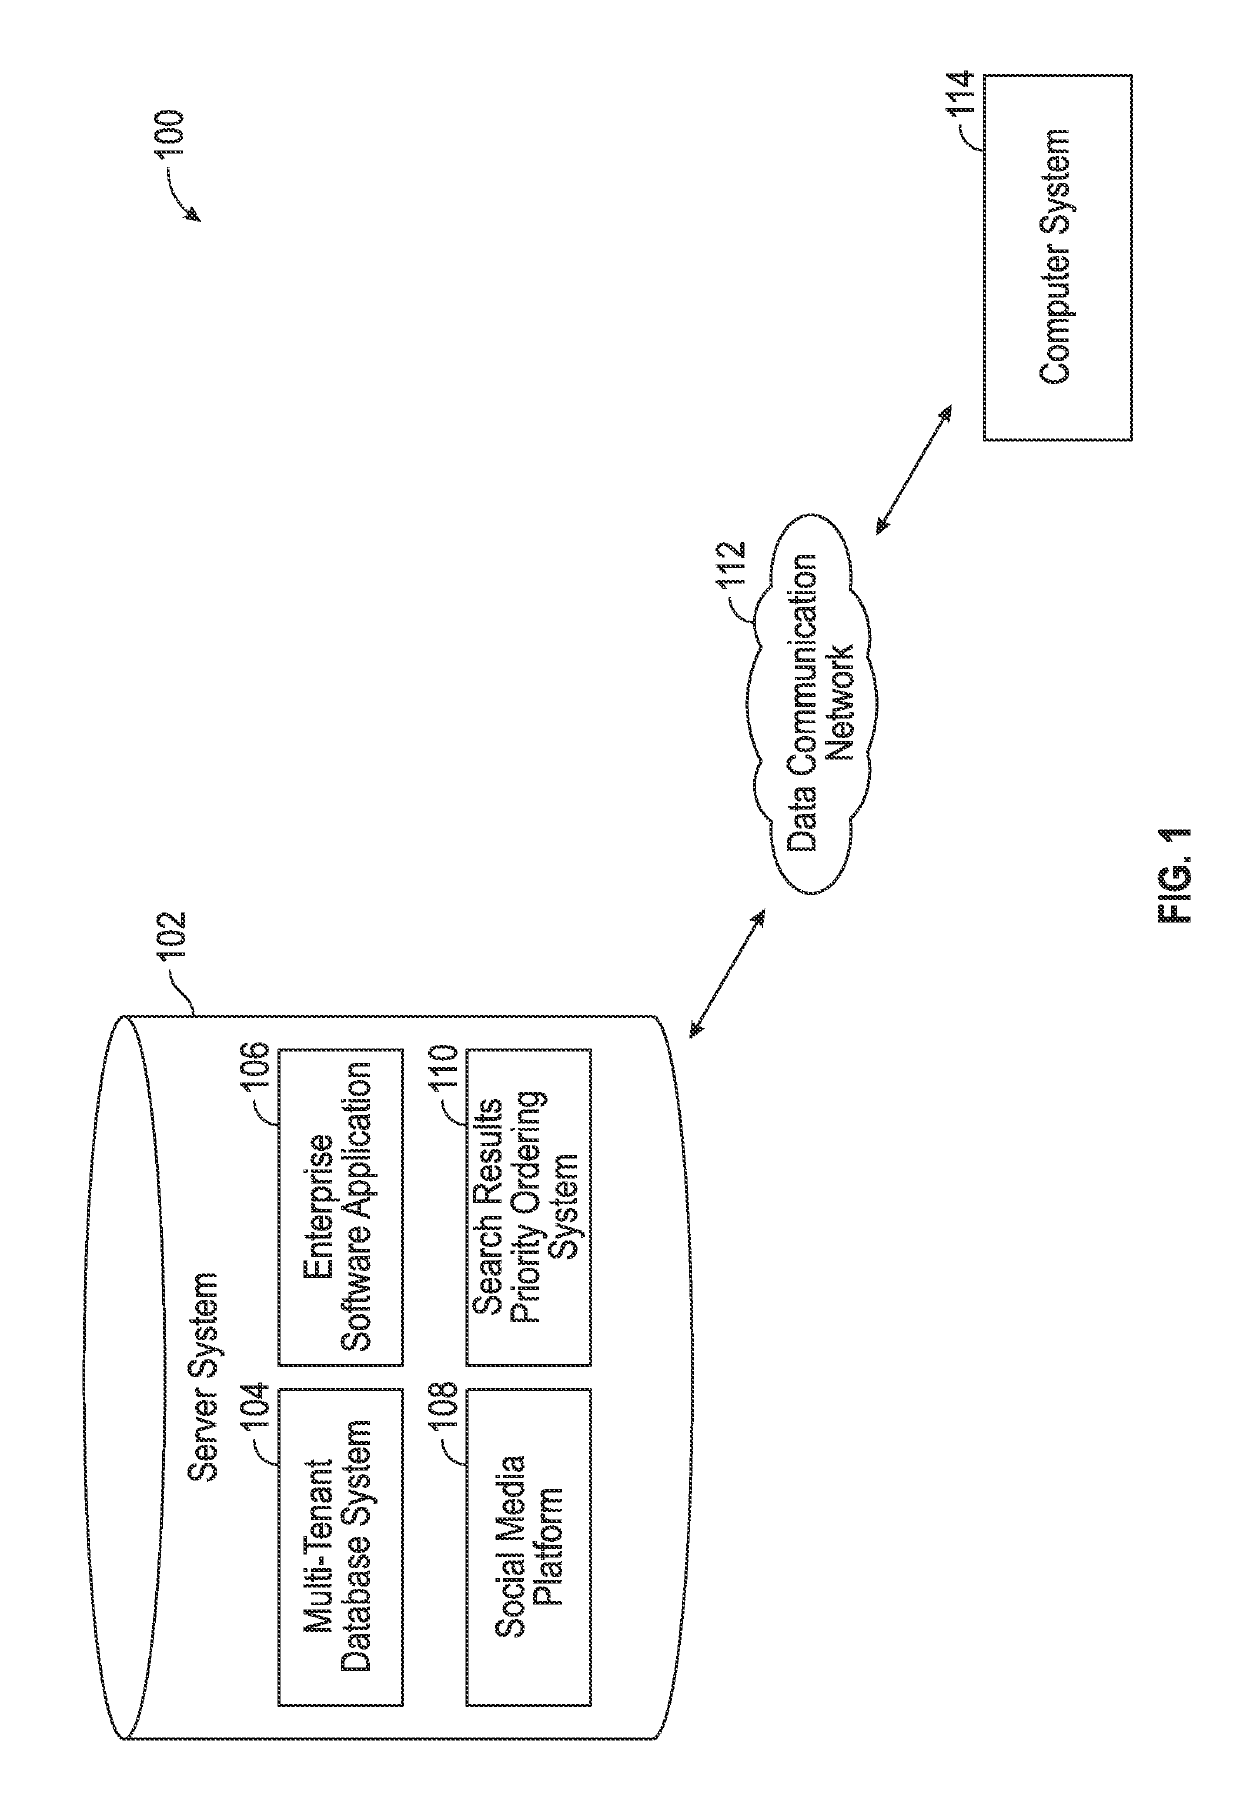 Methods and apparatus for presenting search results according to a priority order determined by user activity